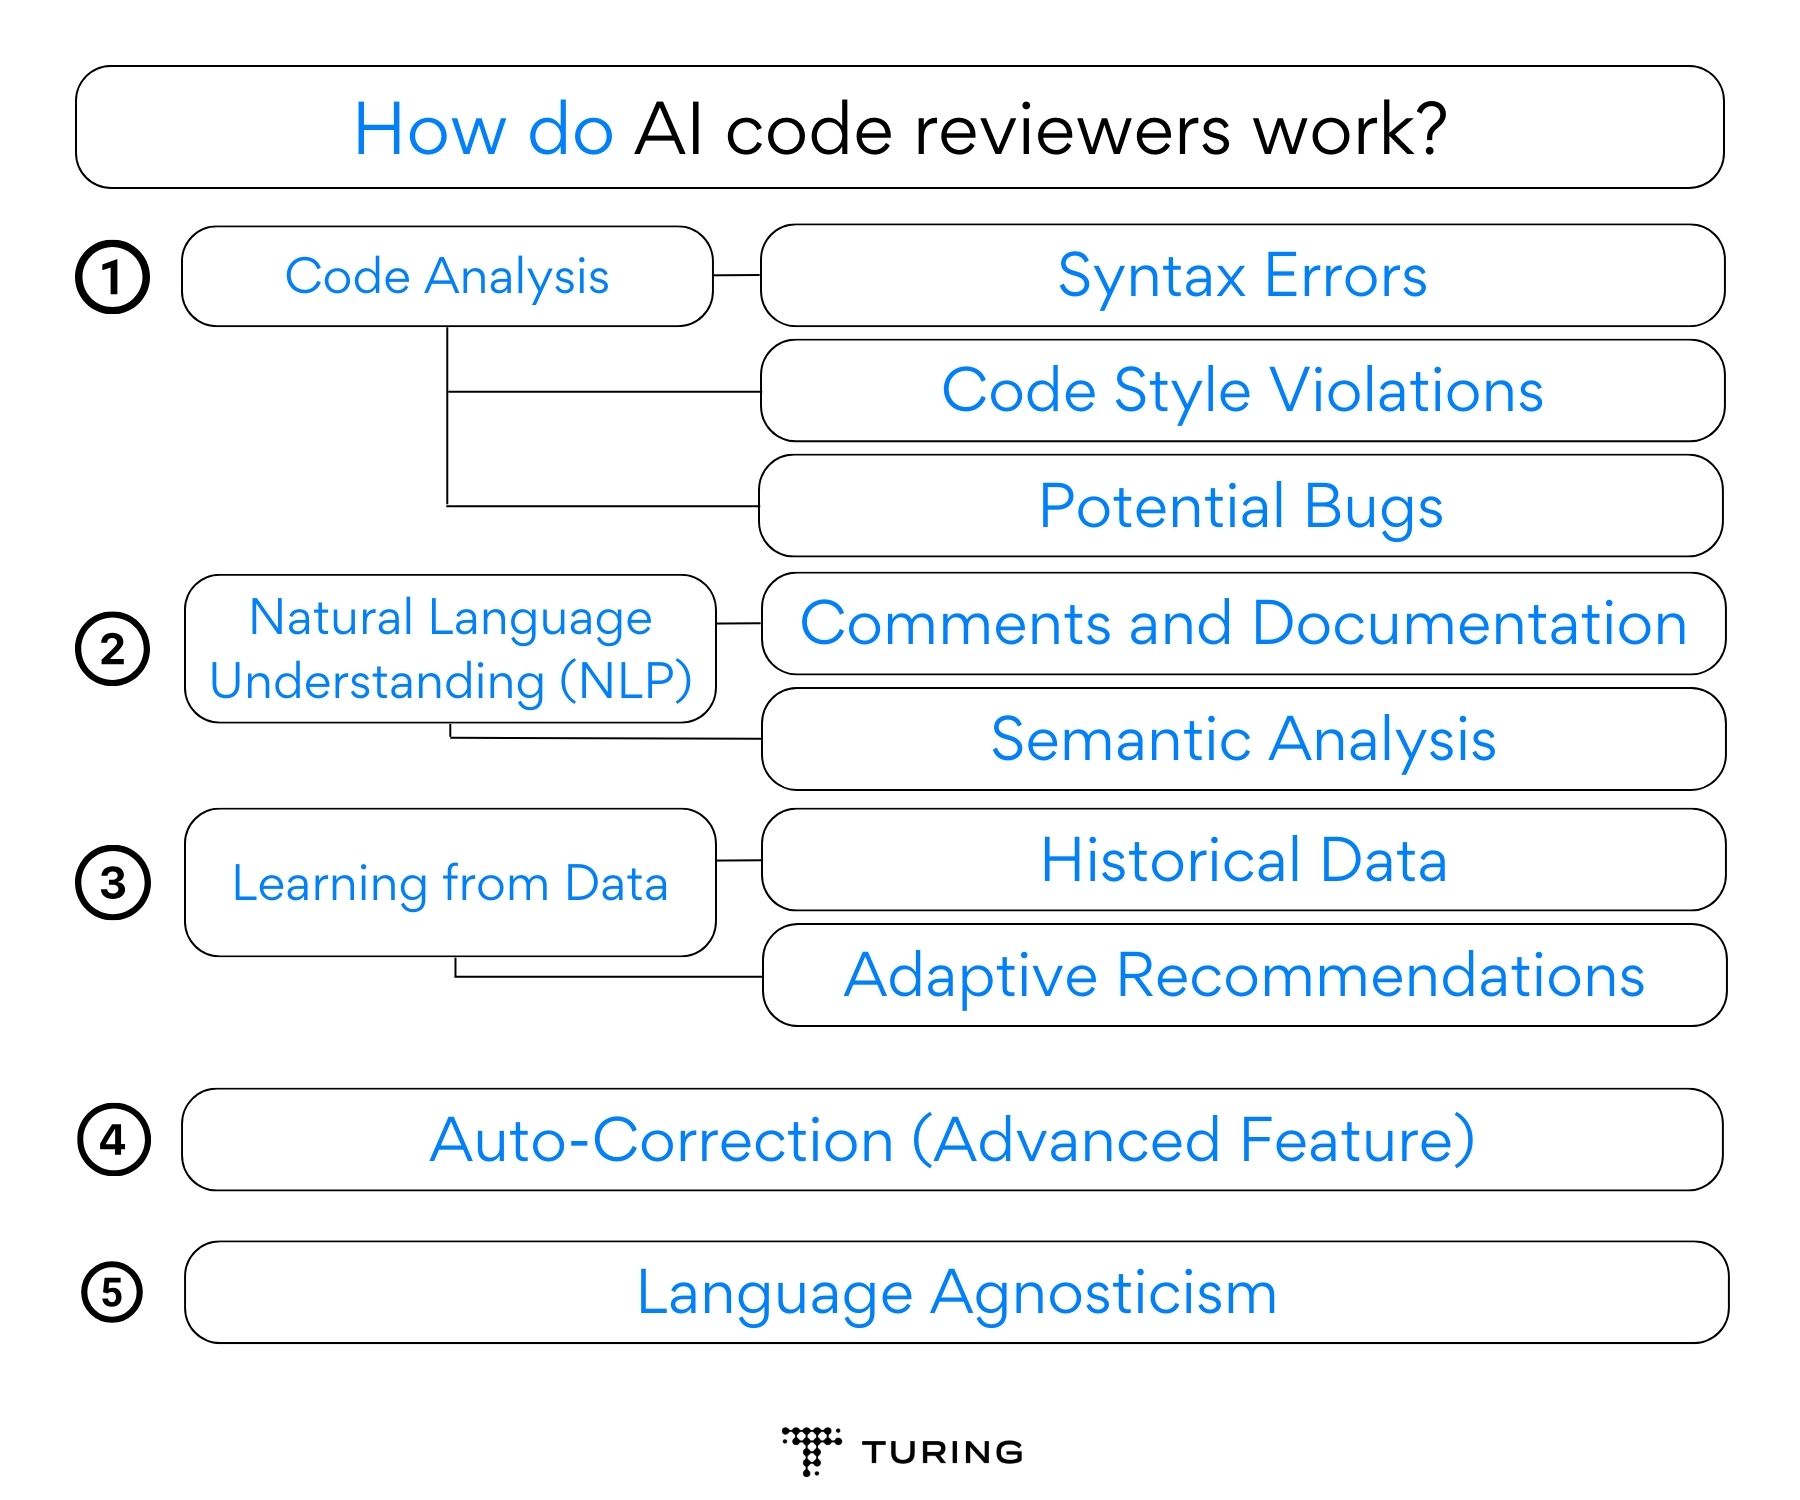 How do AI code reviewers work?